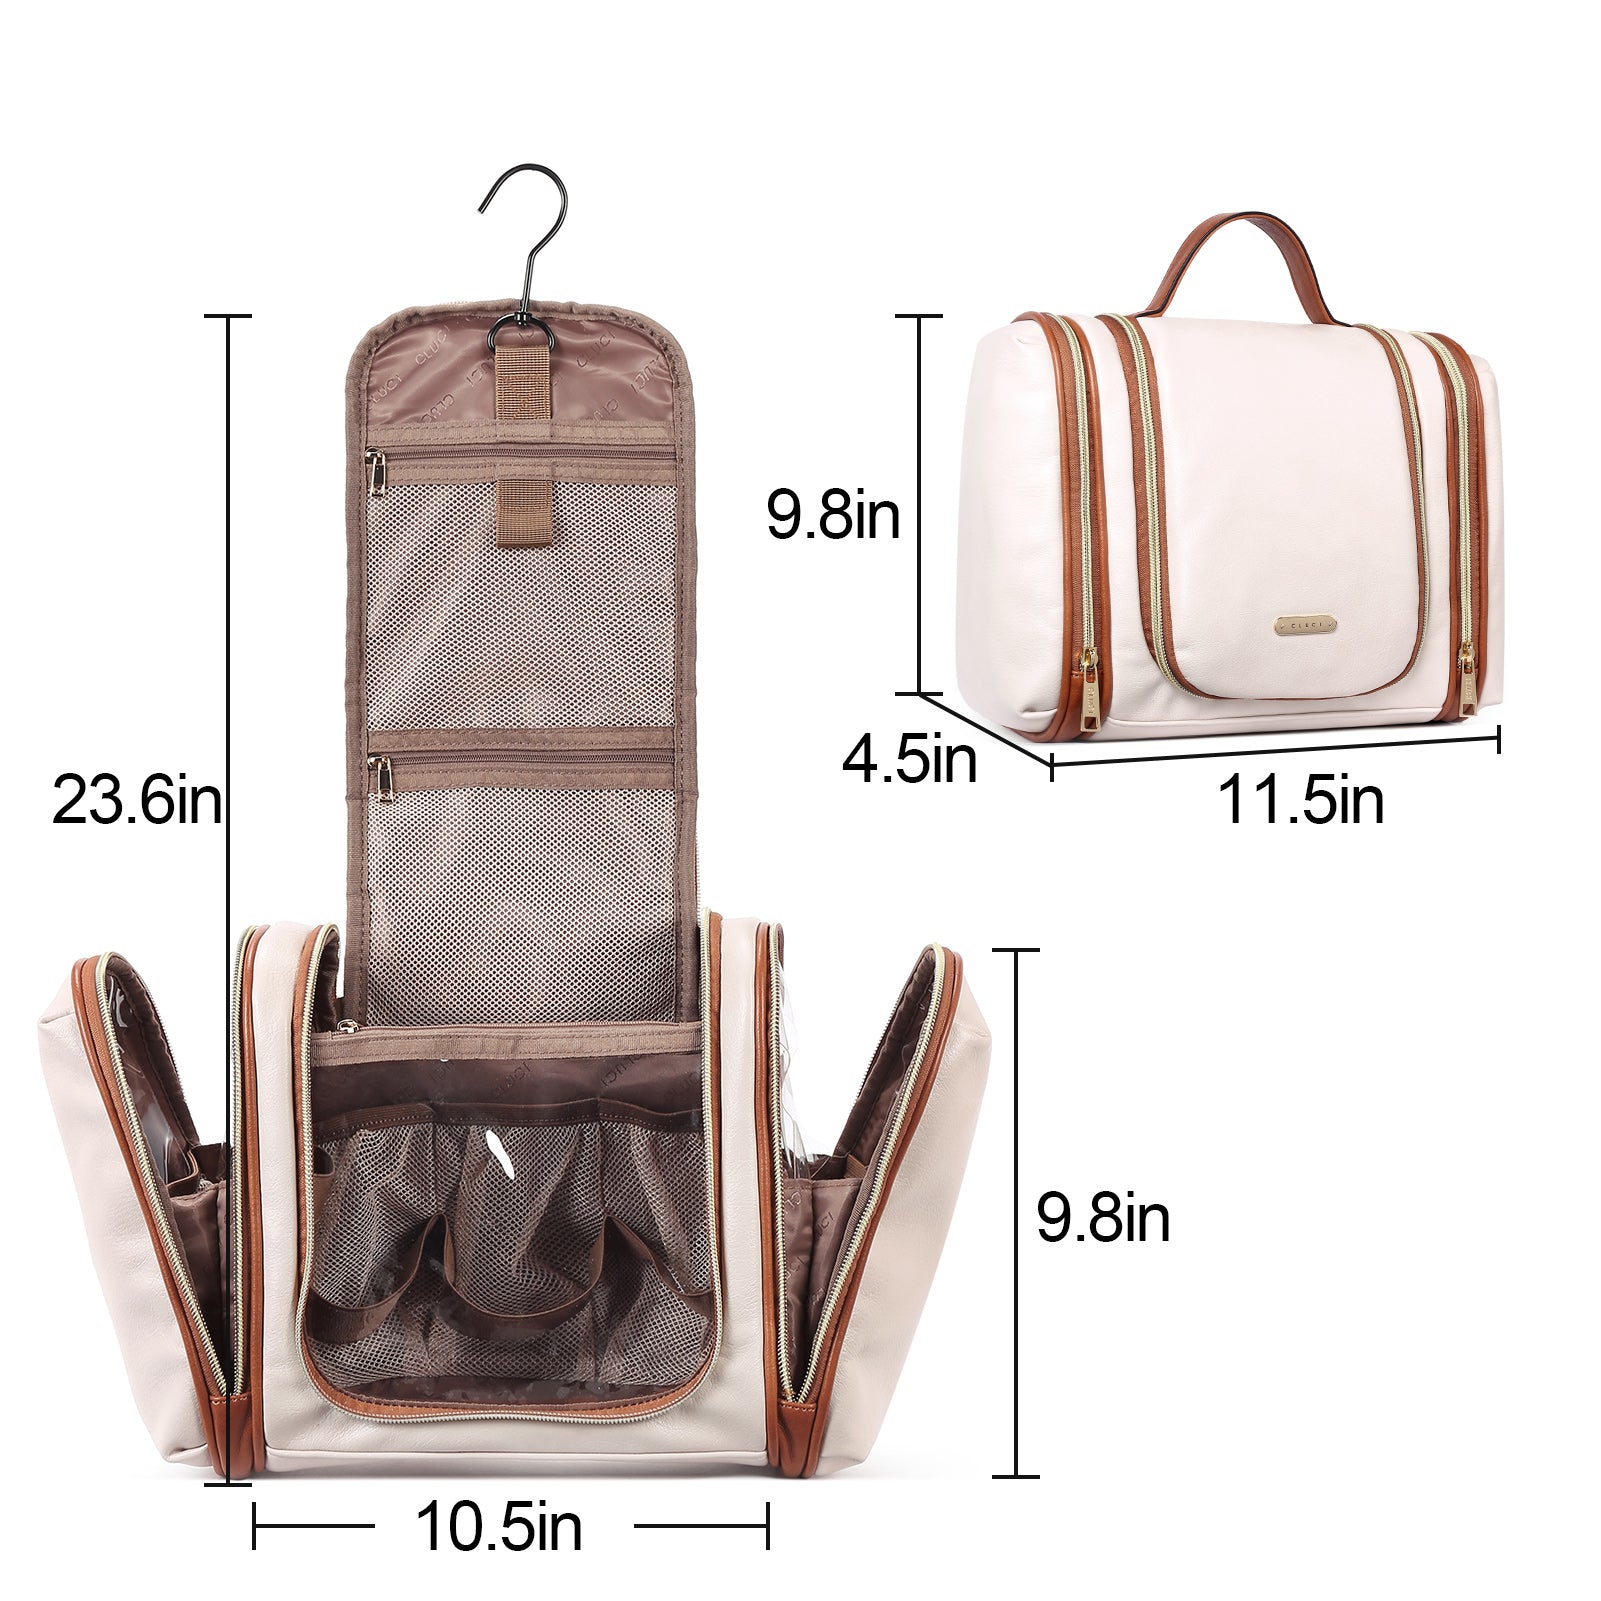 CLUCI Toiletry Bag Hanging Travel Organizer with Transparent Cosmetic